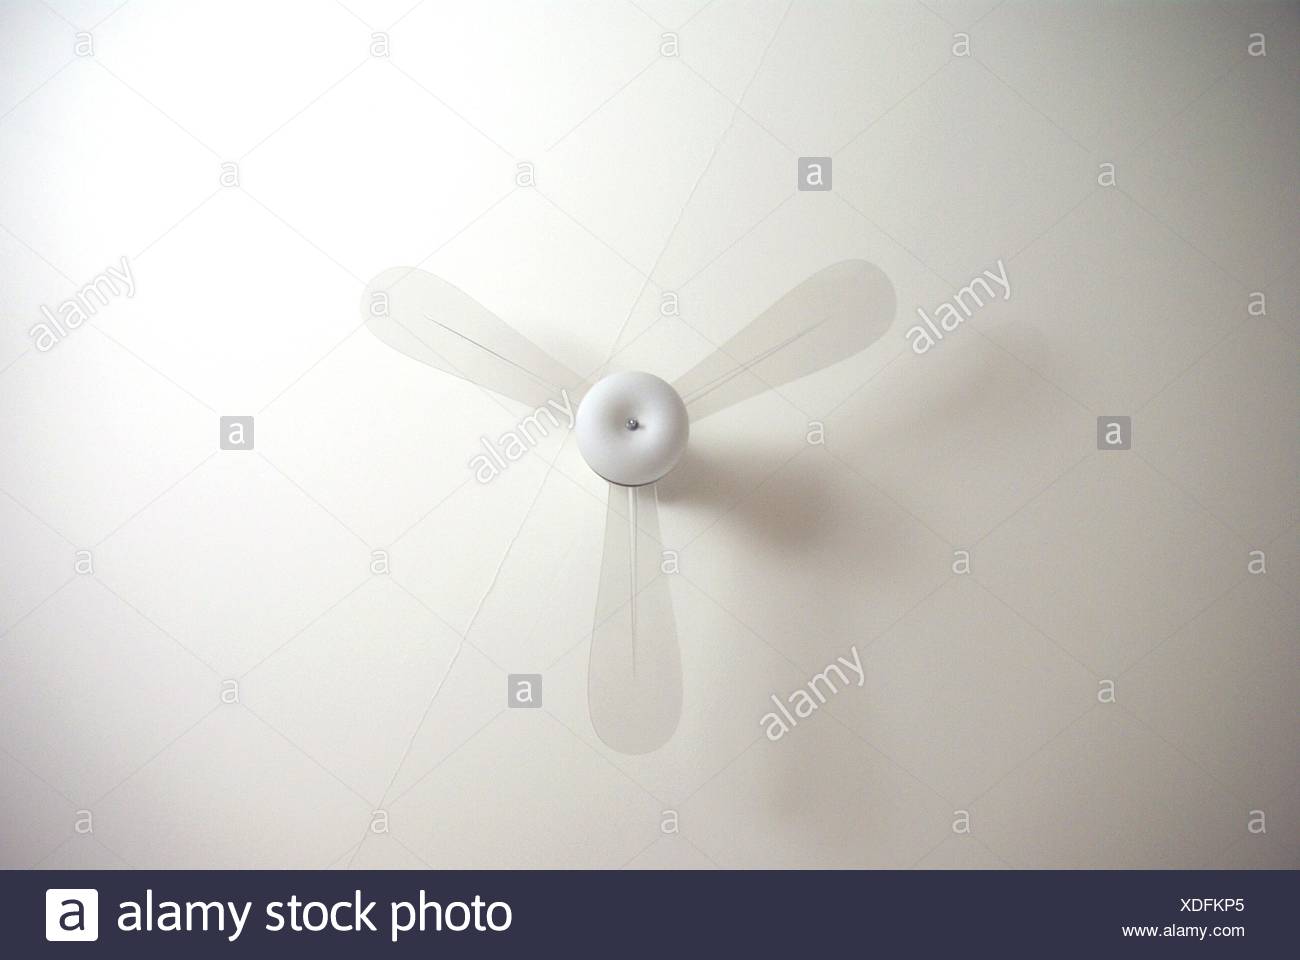 Low Angle View Of Ceiling Fan At Home Stock Photo 283701213